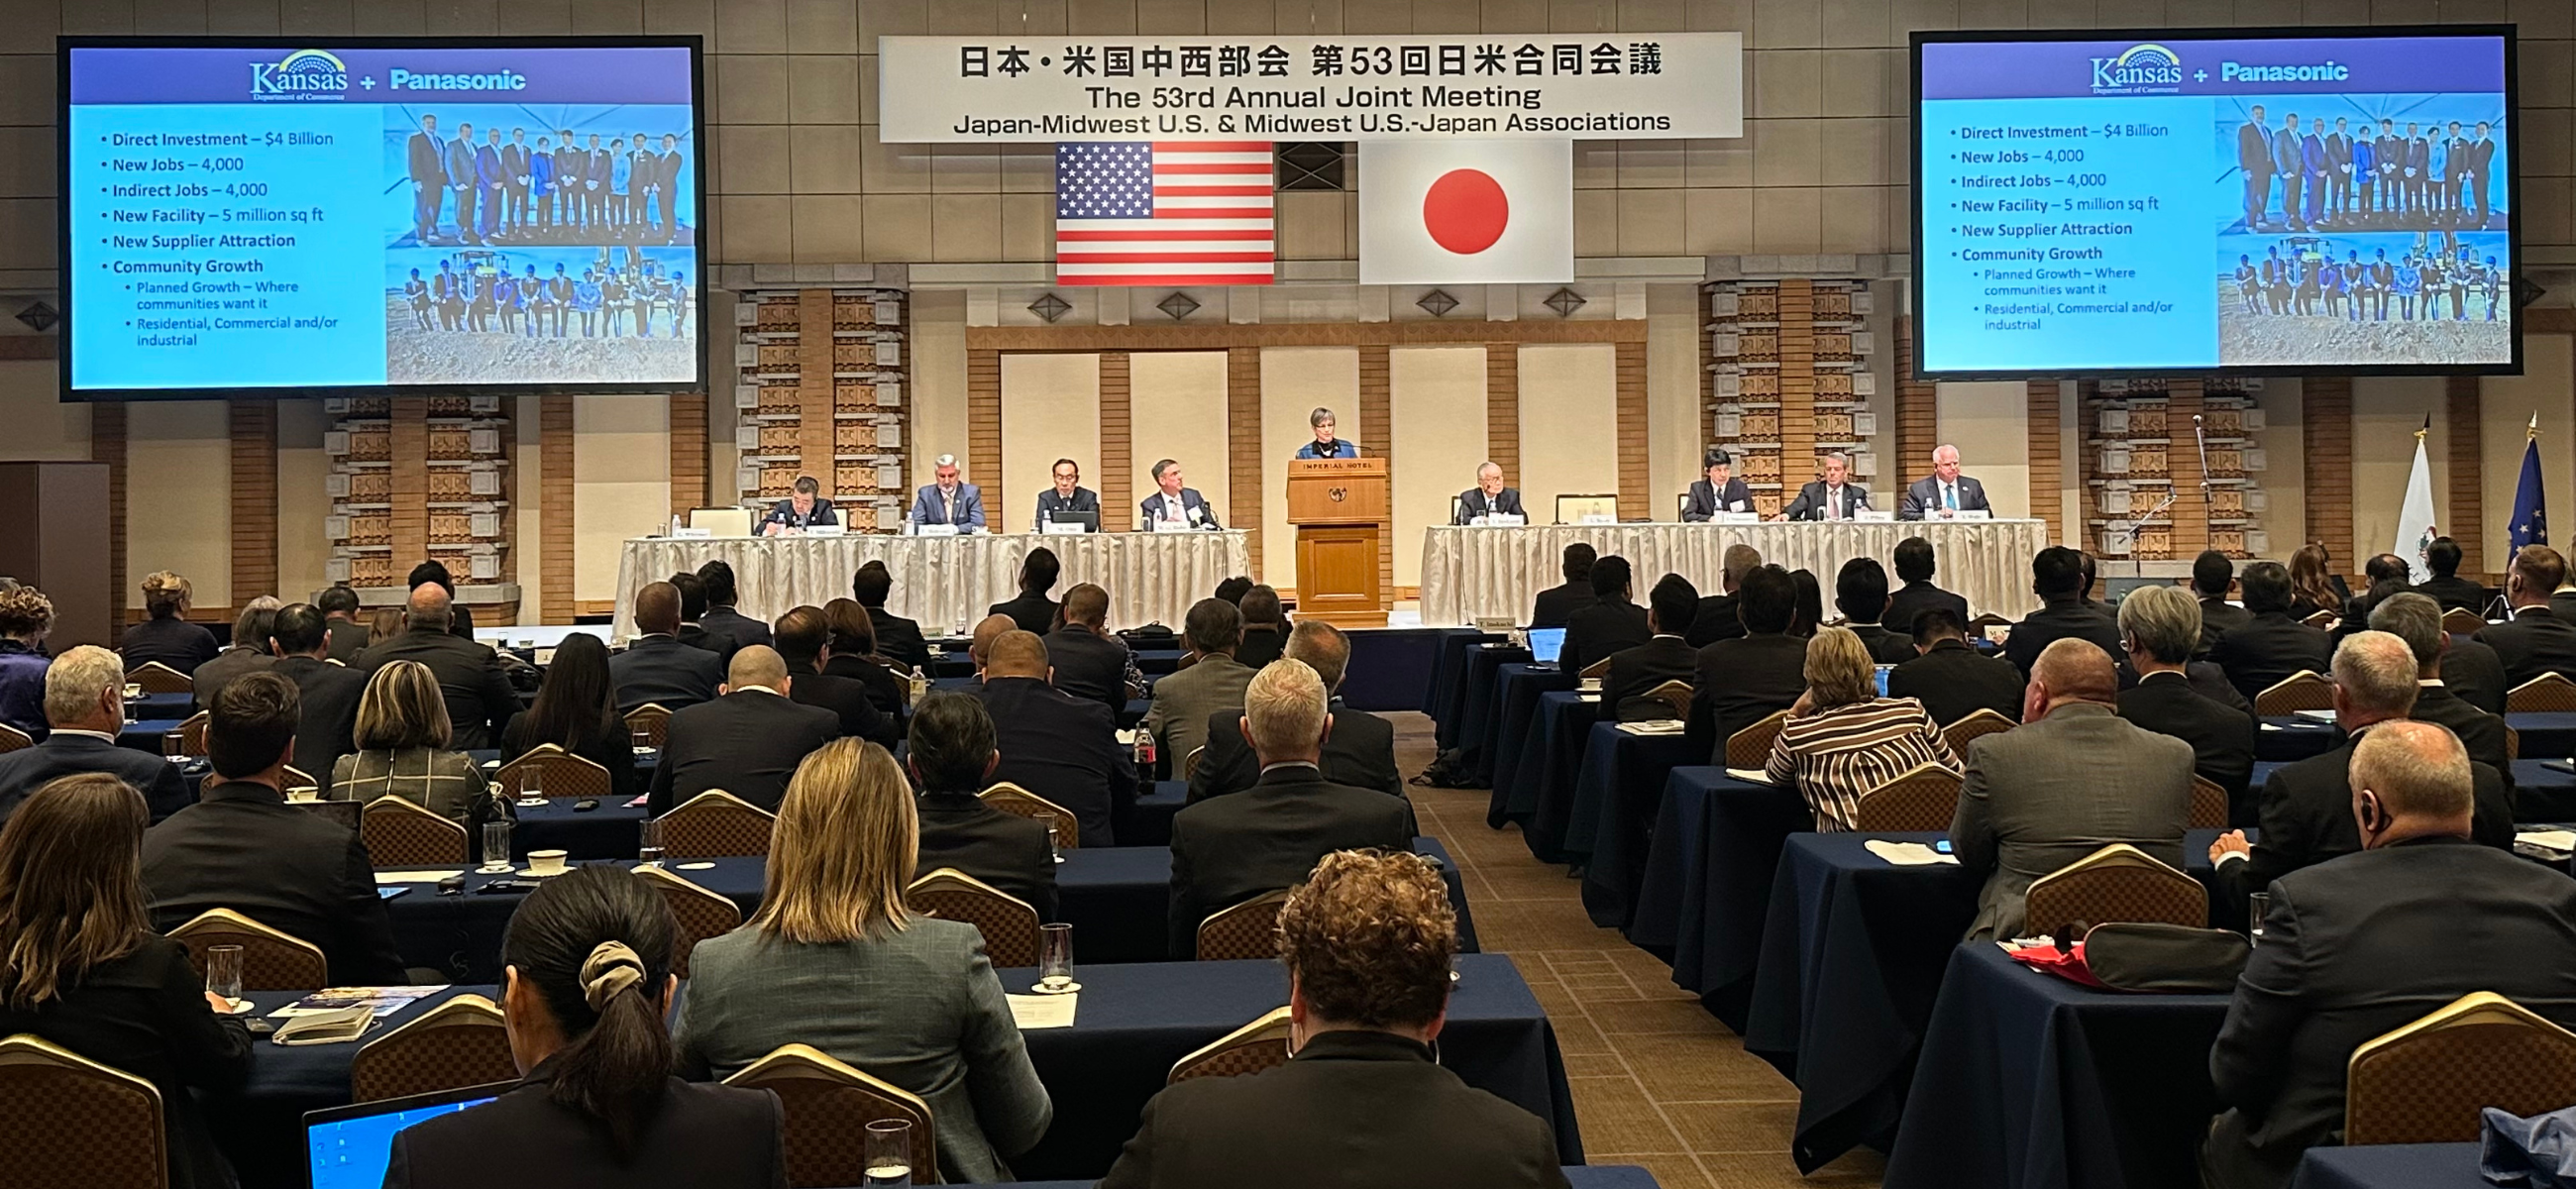 Gov. Laura Kelly speaks at the Midwest U.S.-Japan Association Conference on Monday in Tokyo.